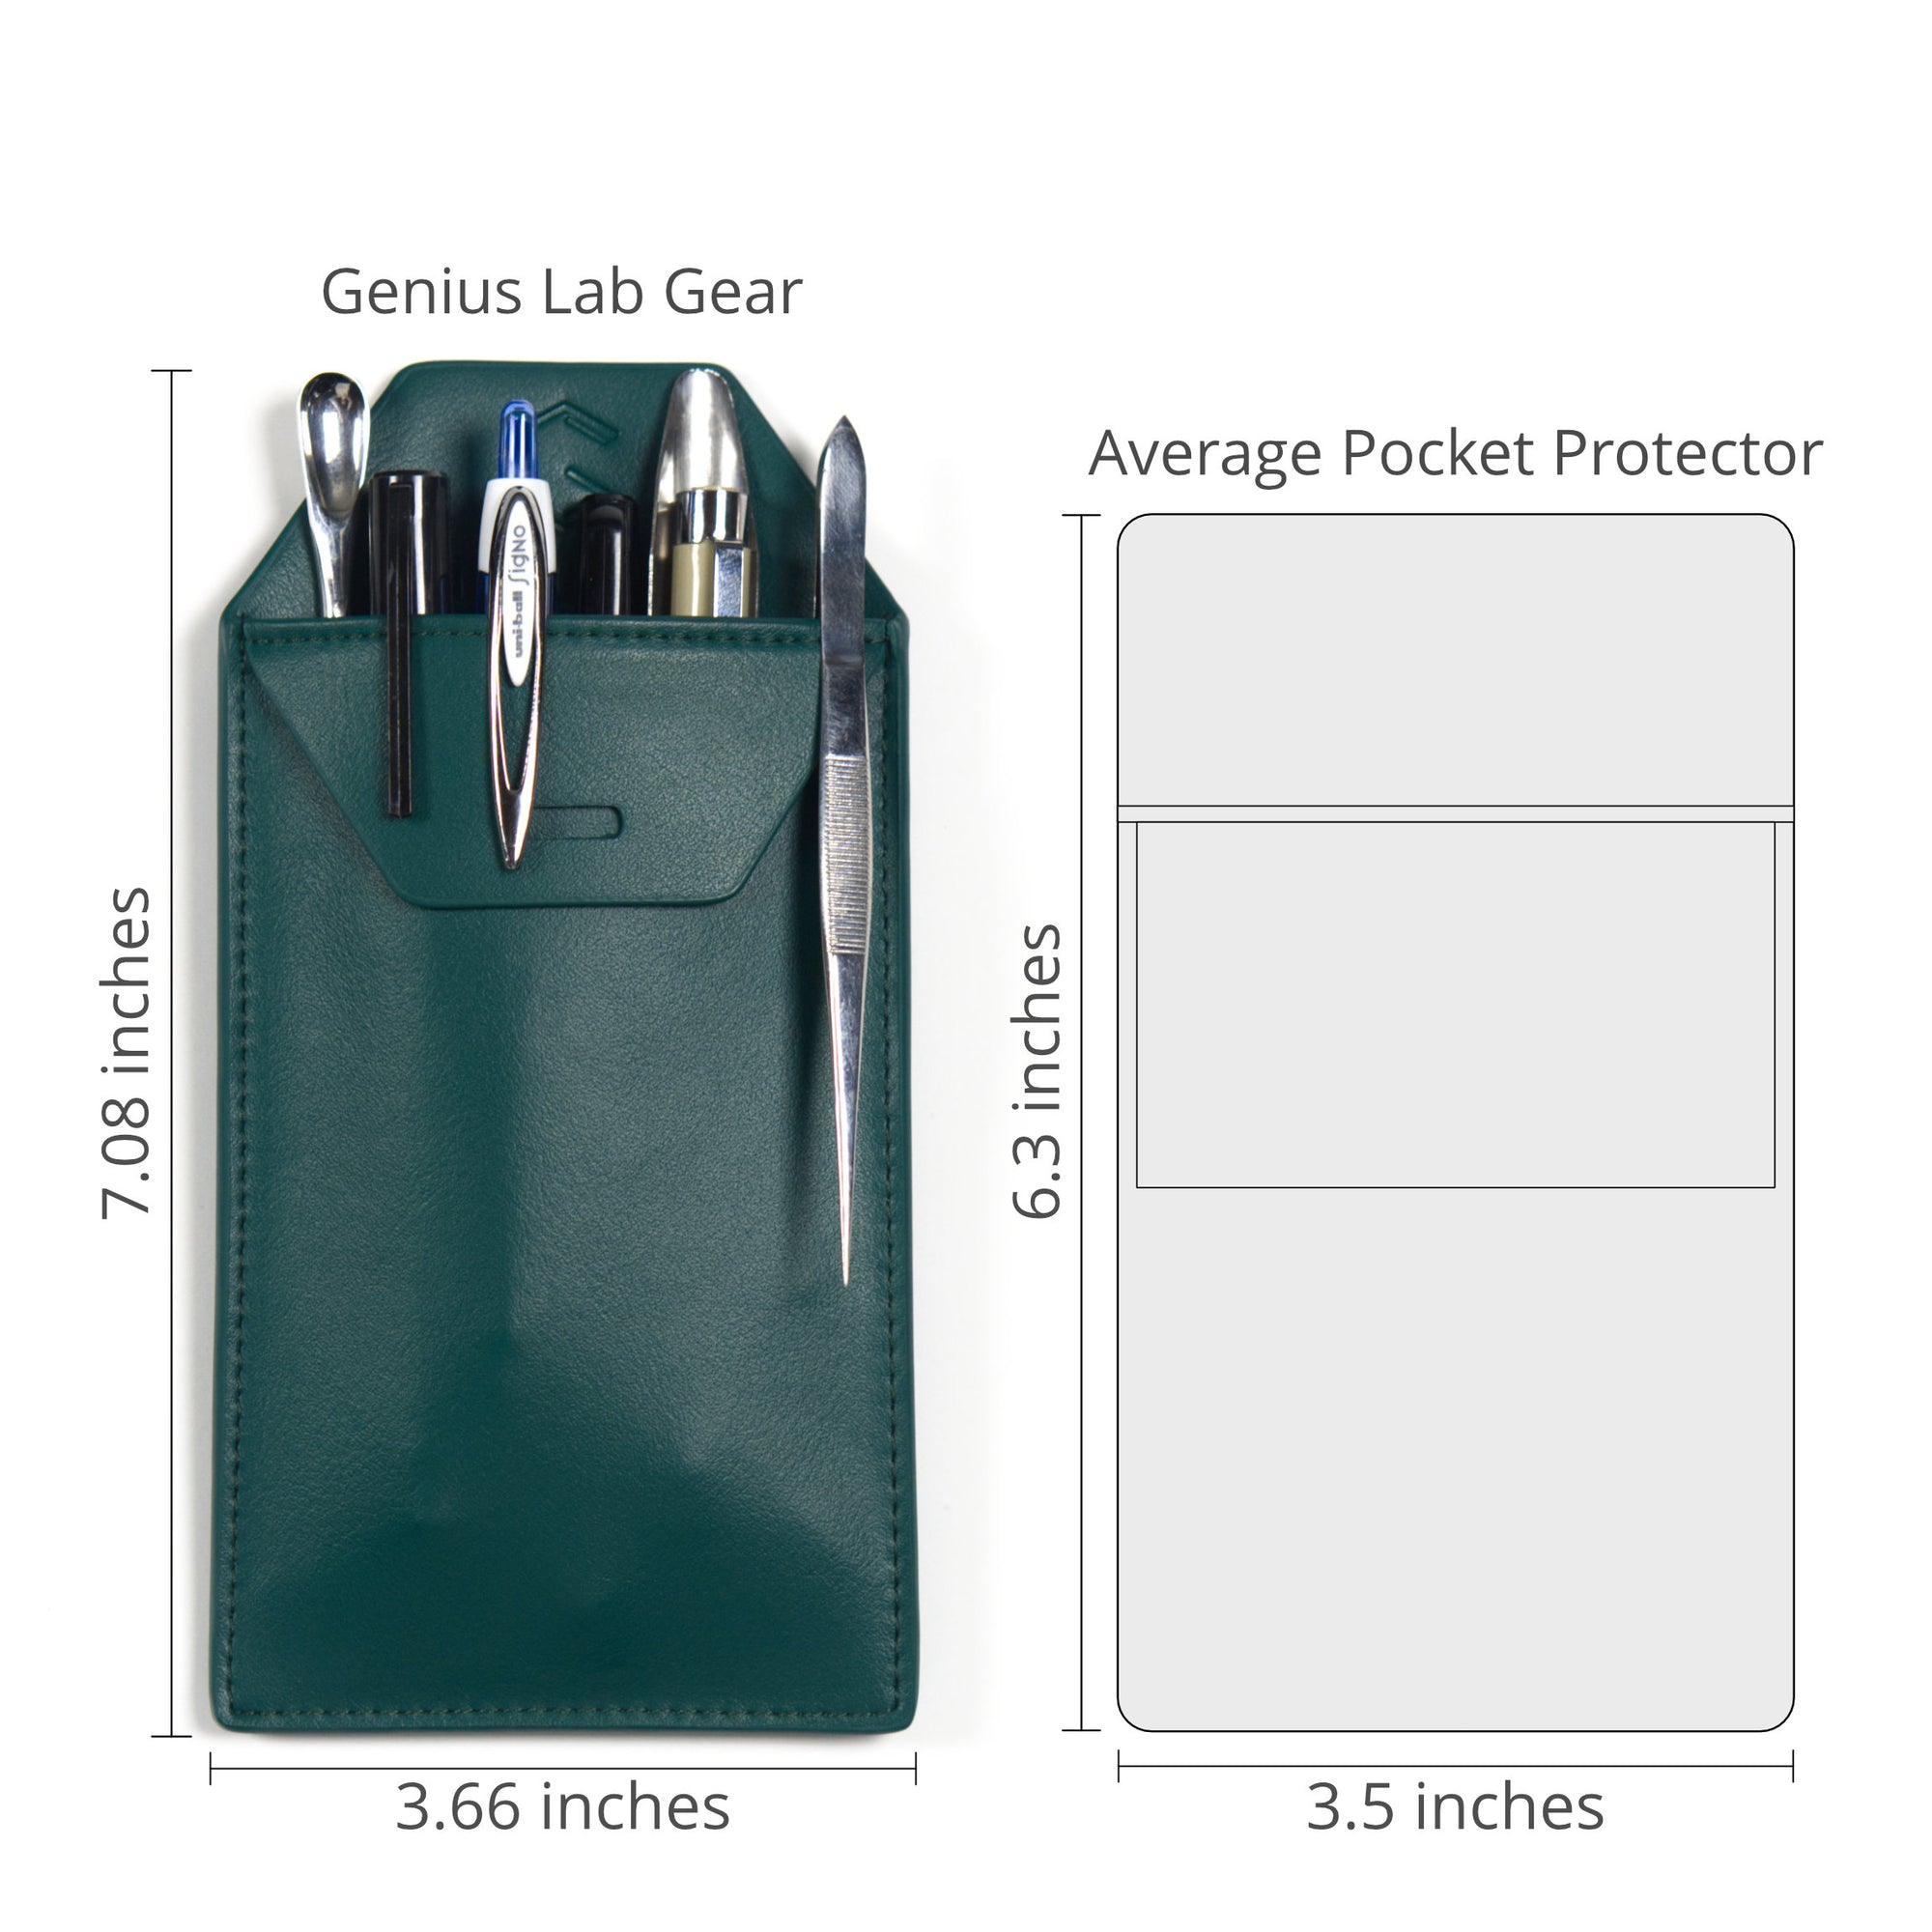 large pocket protector for scientists engineers and doctors